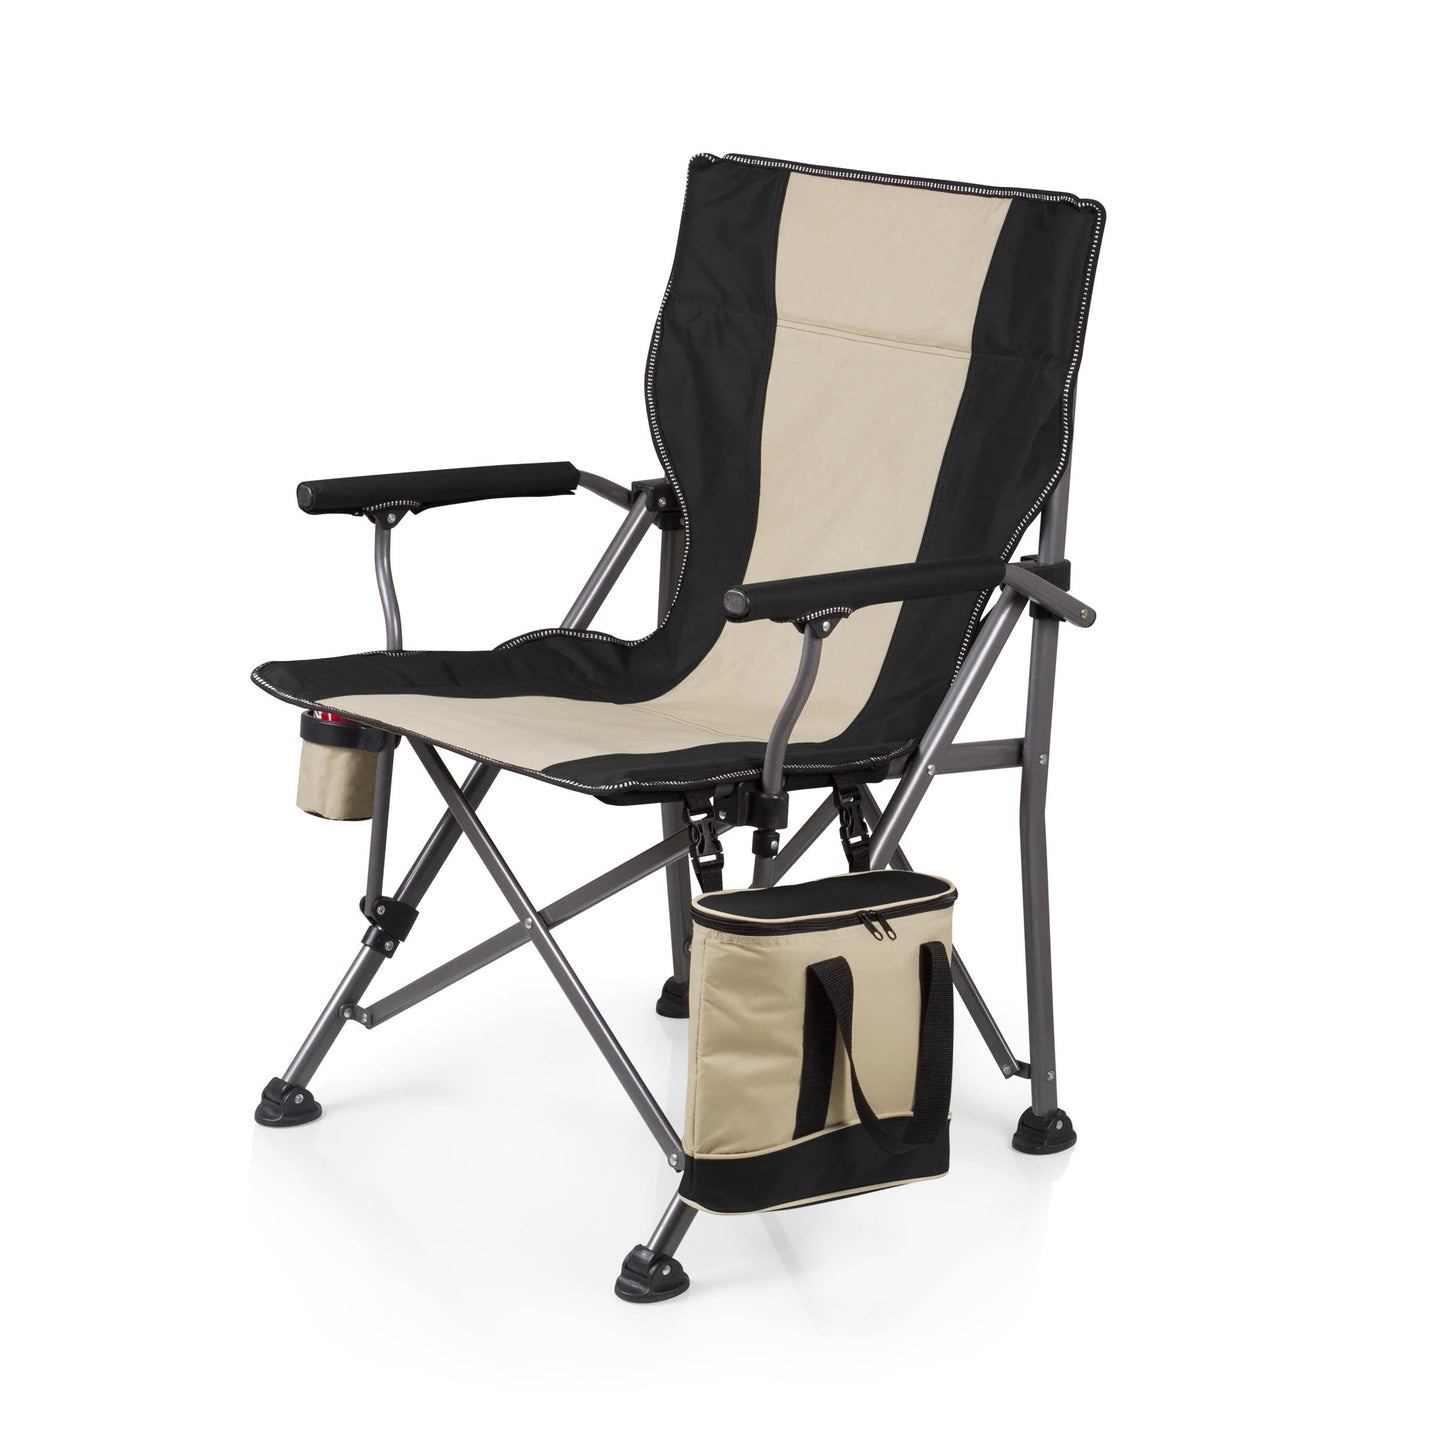 Dallas Cowboys - Outlander Folding Camping Chair with Cooler